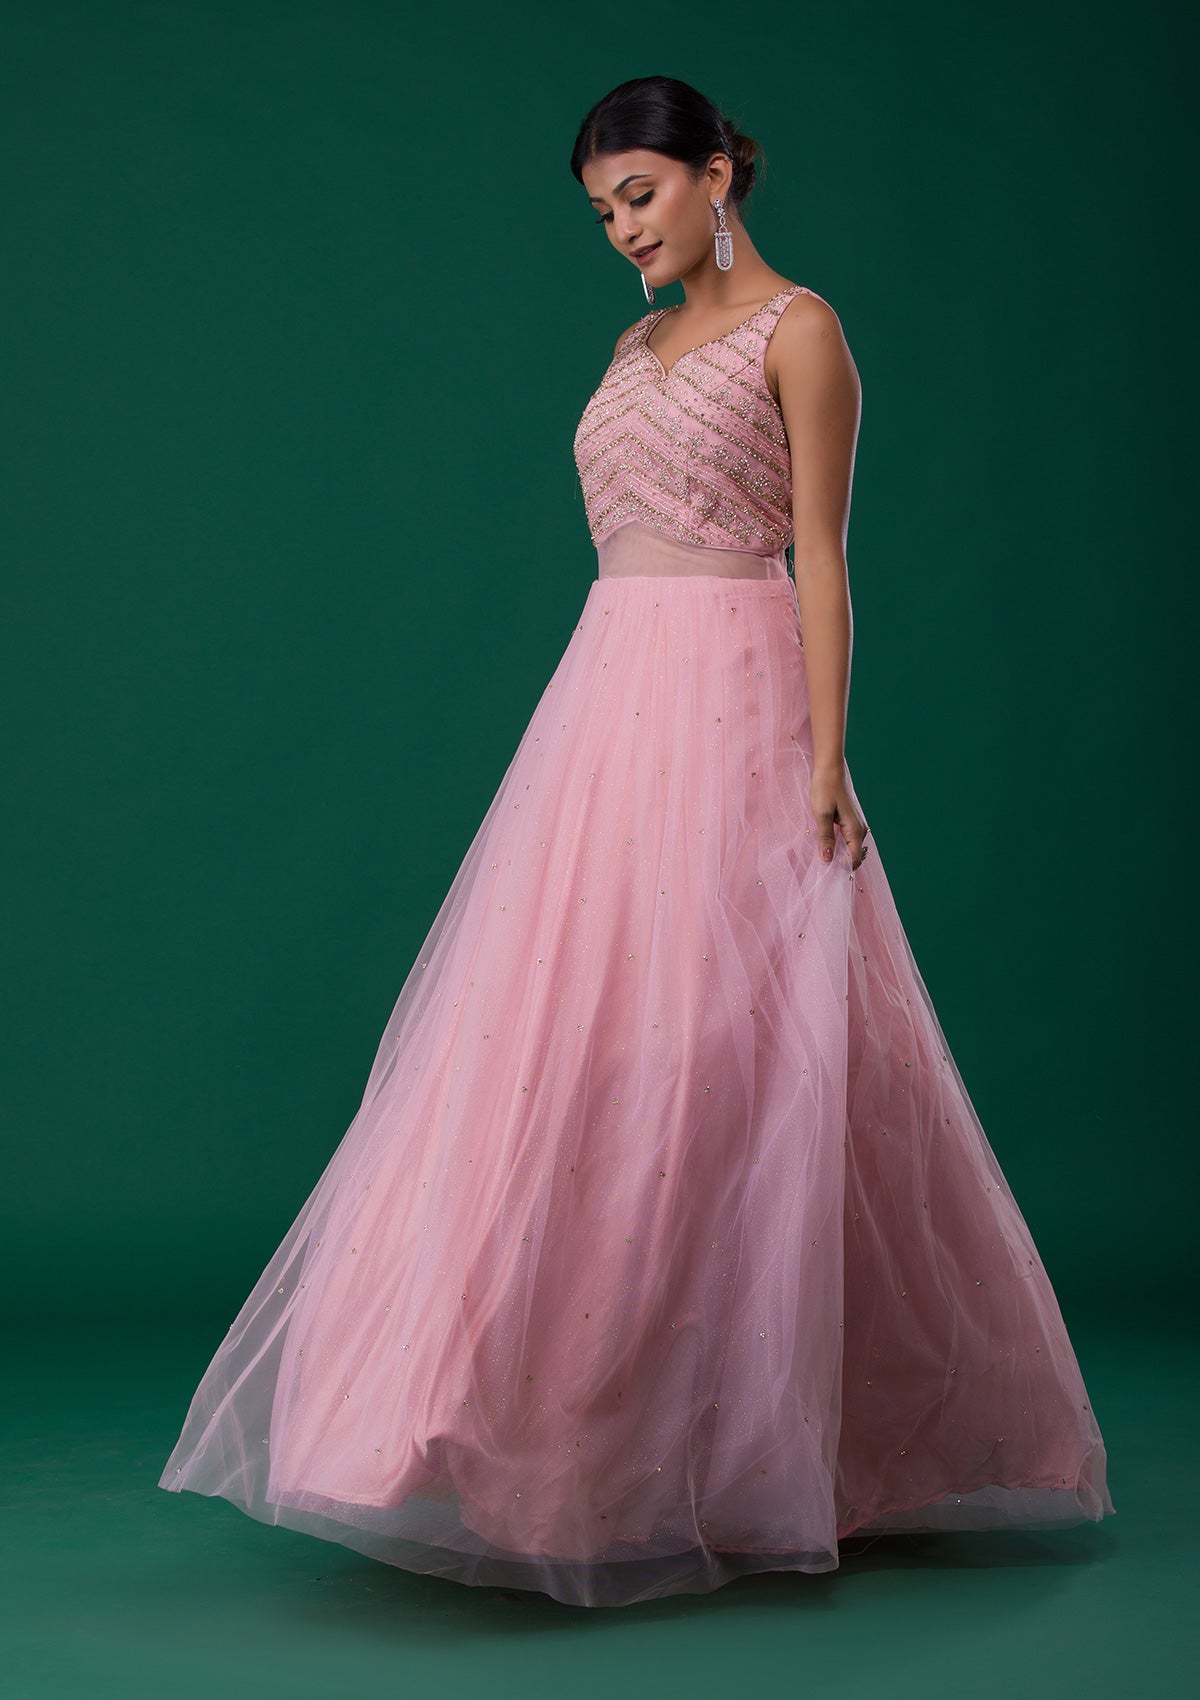 G149 Pink Victoria Ball Gown Engagement Gown Size XS30 to L36   Style Icon wwwdressrentin